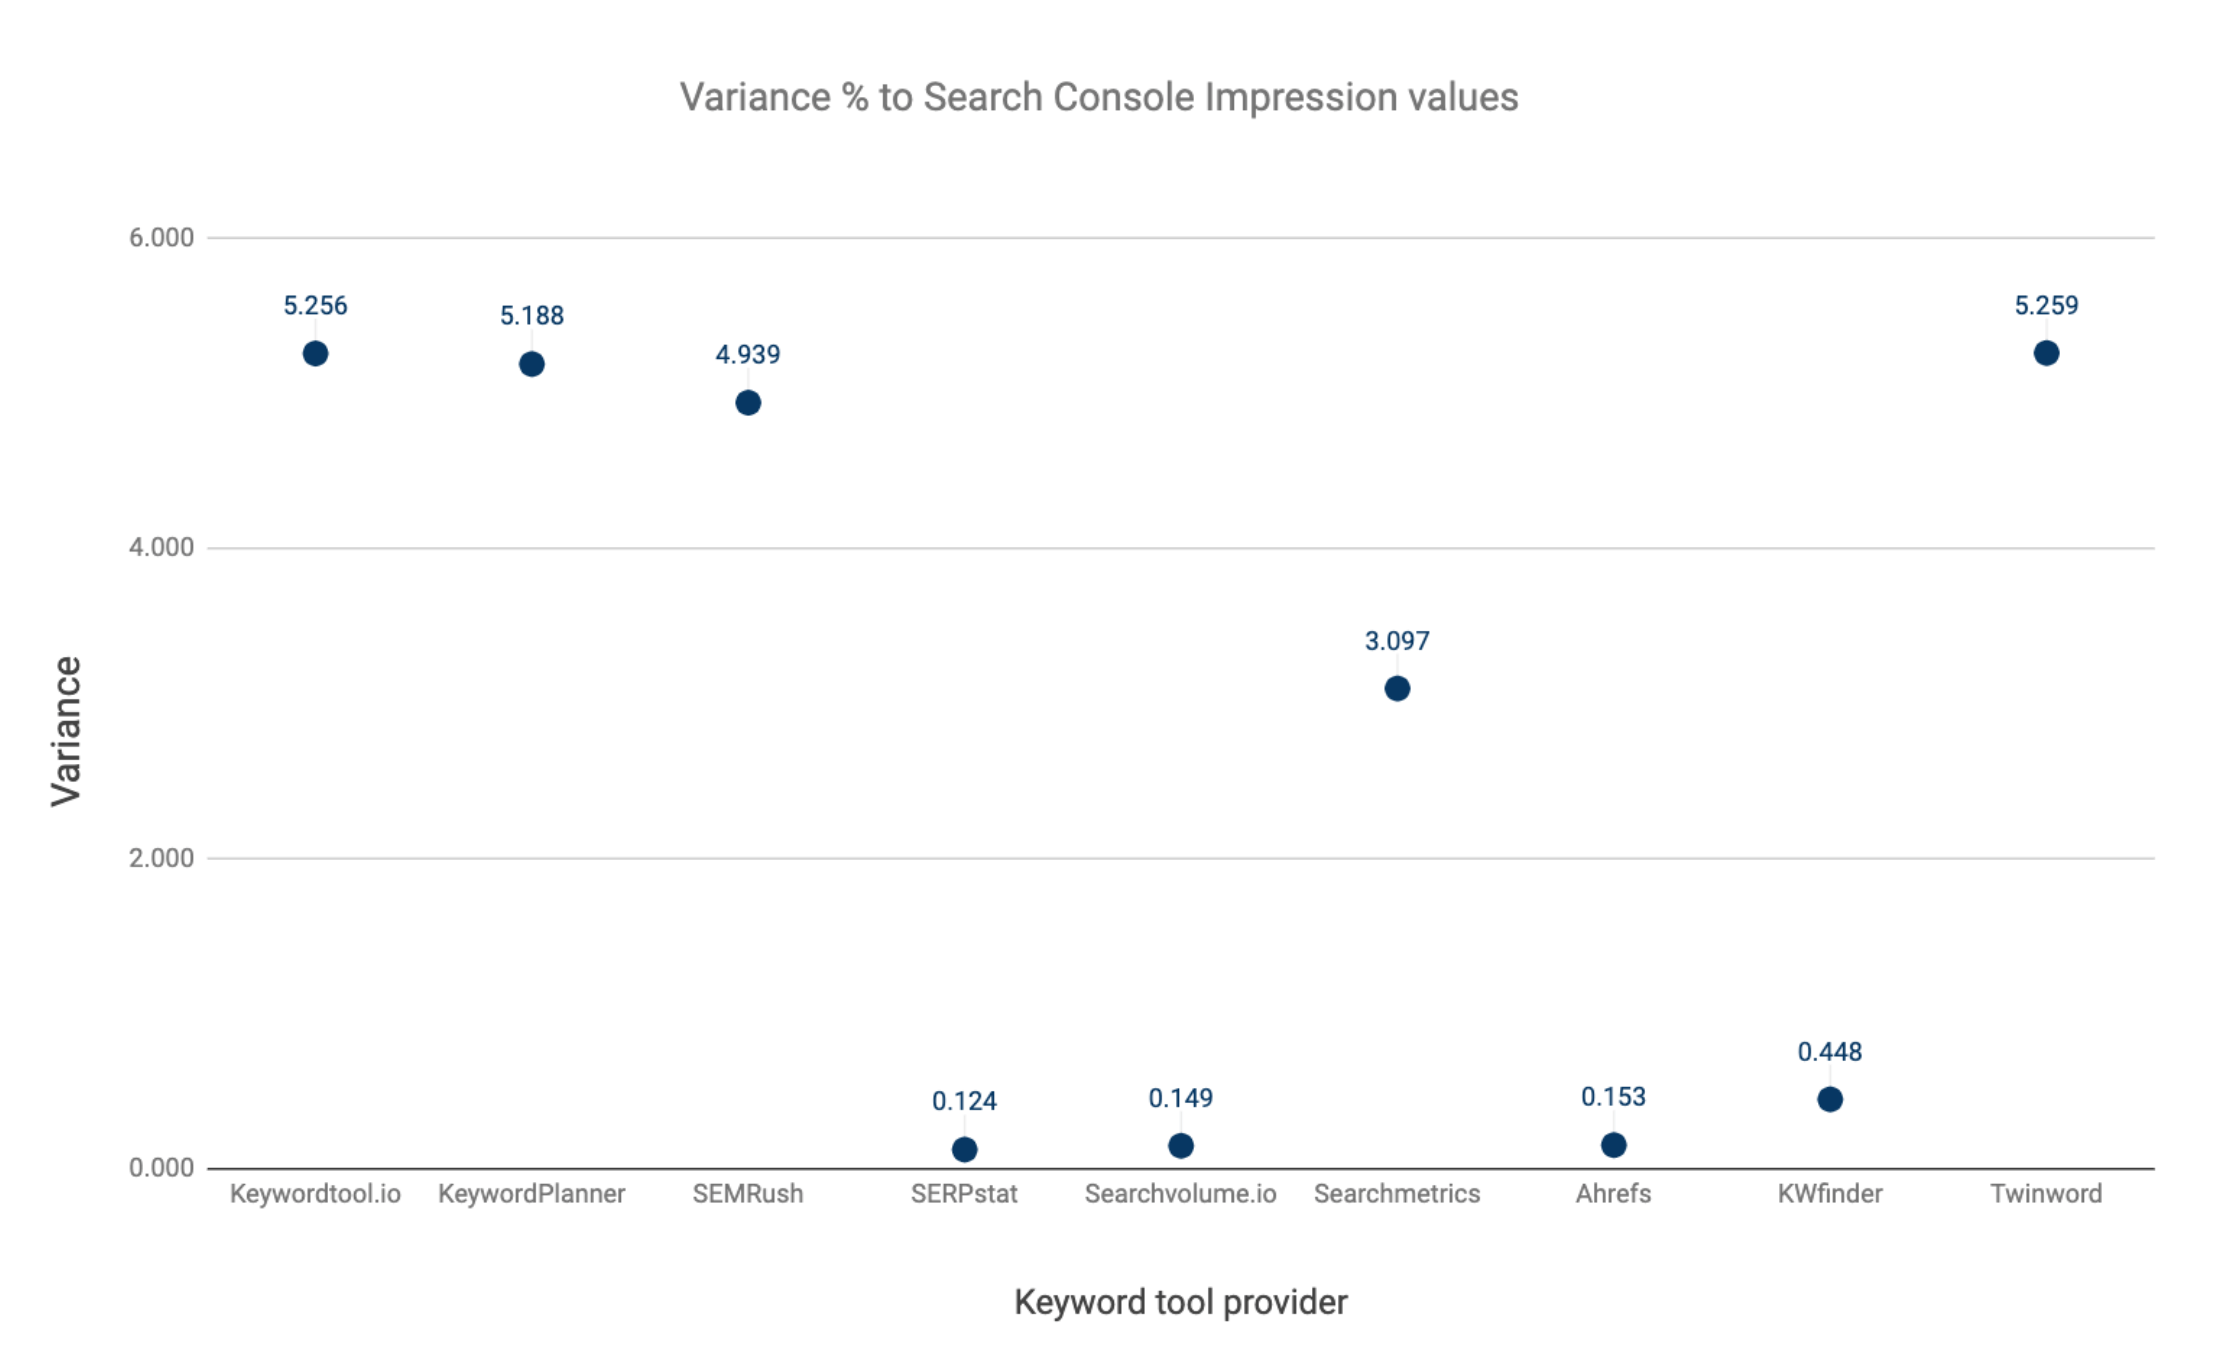 Variance in % of tooling providers deviations from search console values _ SEJ